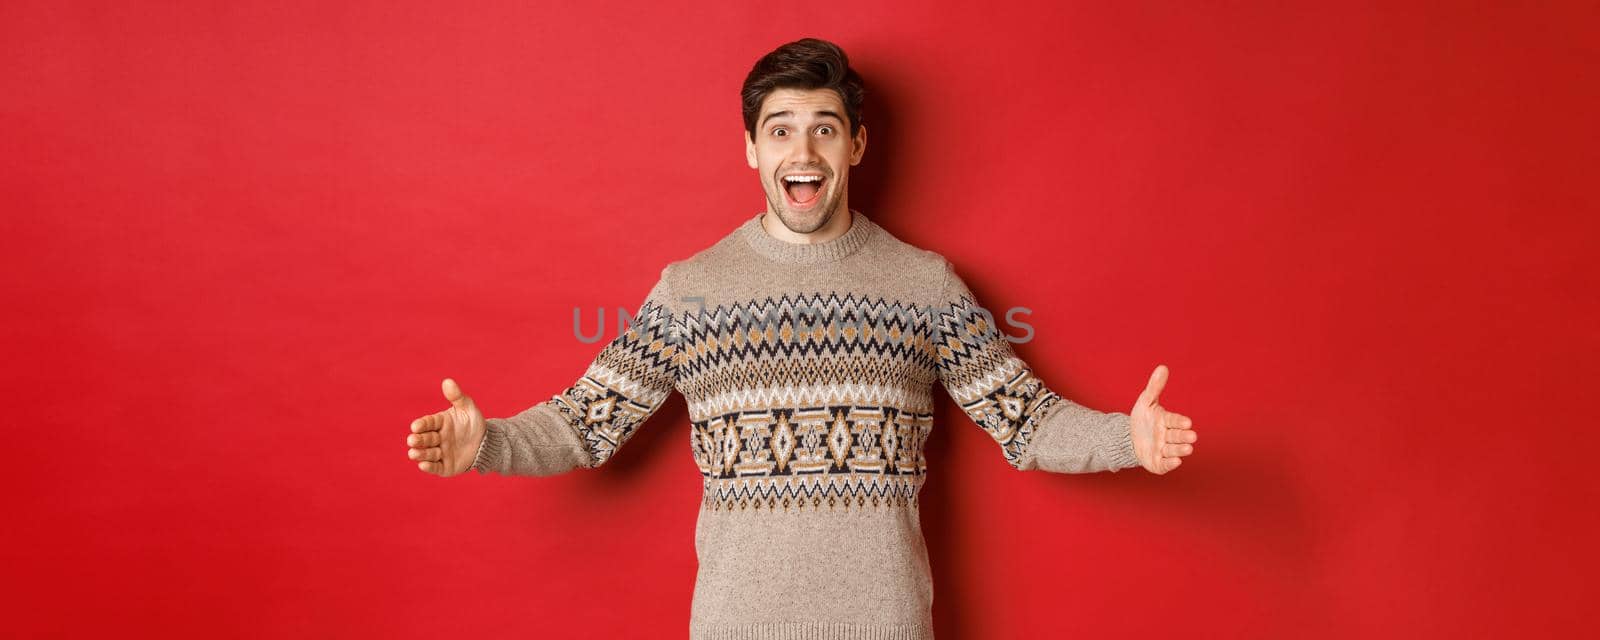 Portrait of attractive happy man in christmas sweater showing big present, spread hands sideways as if holding large box, standing over red background.